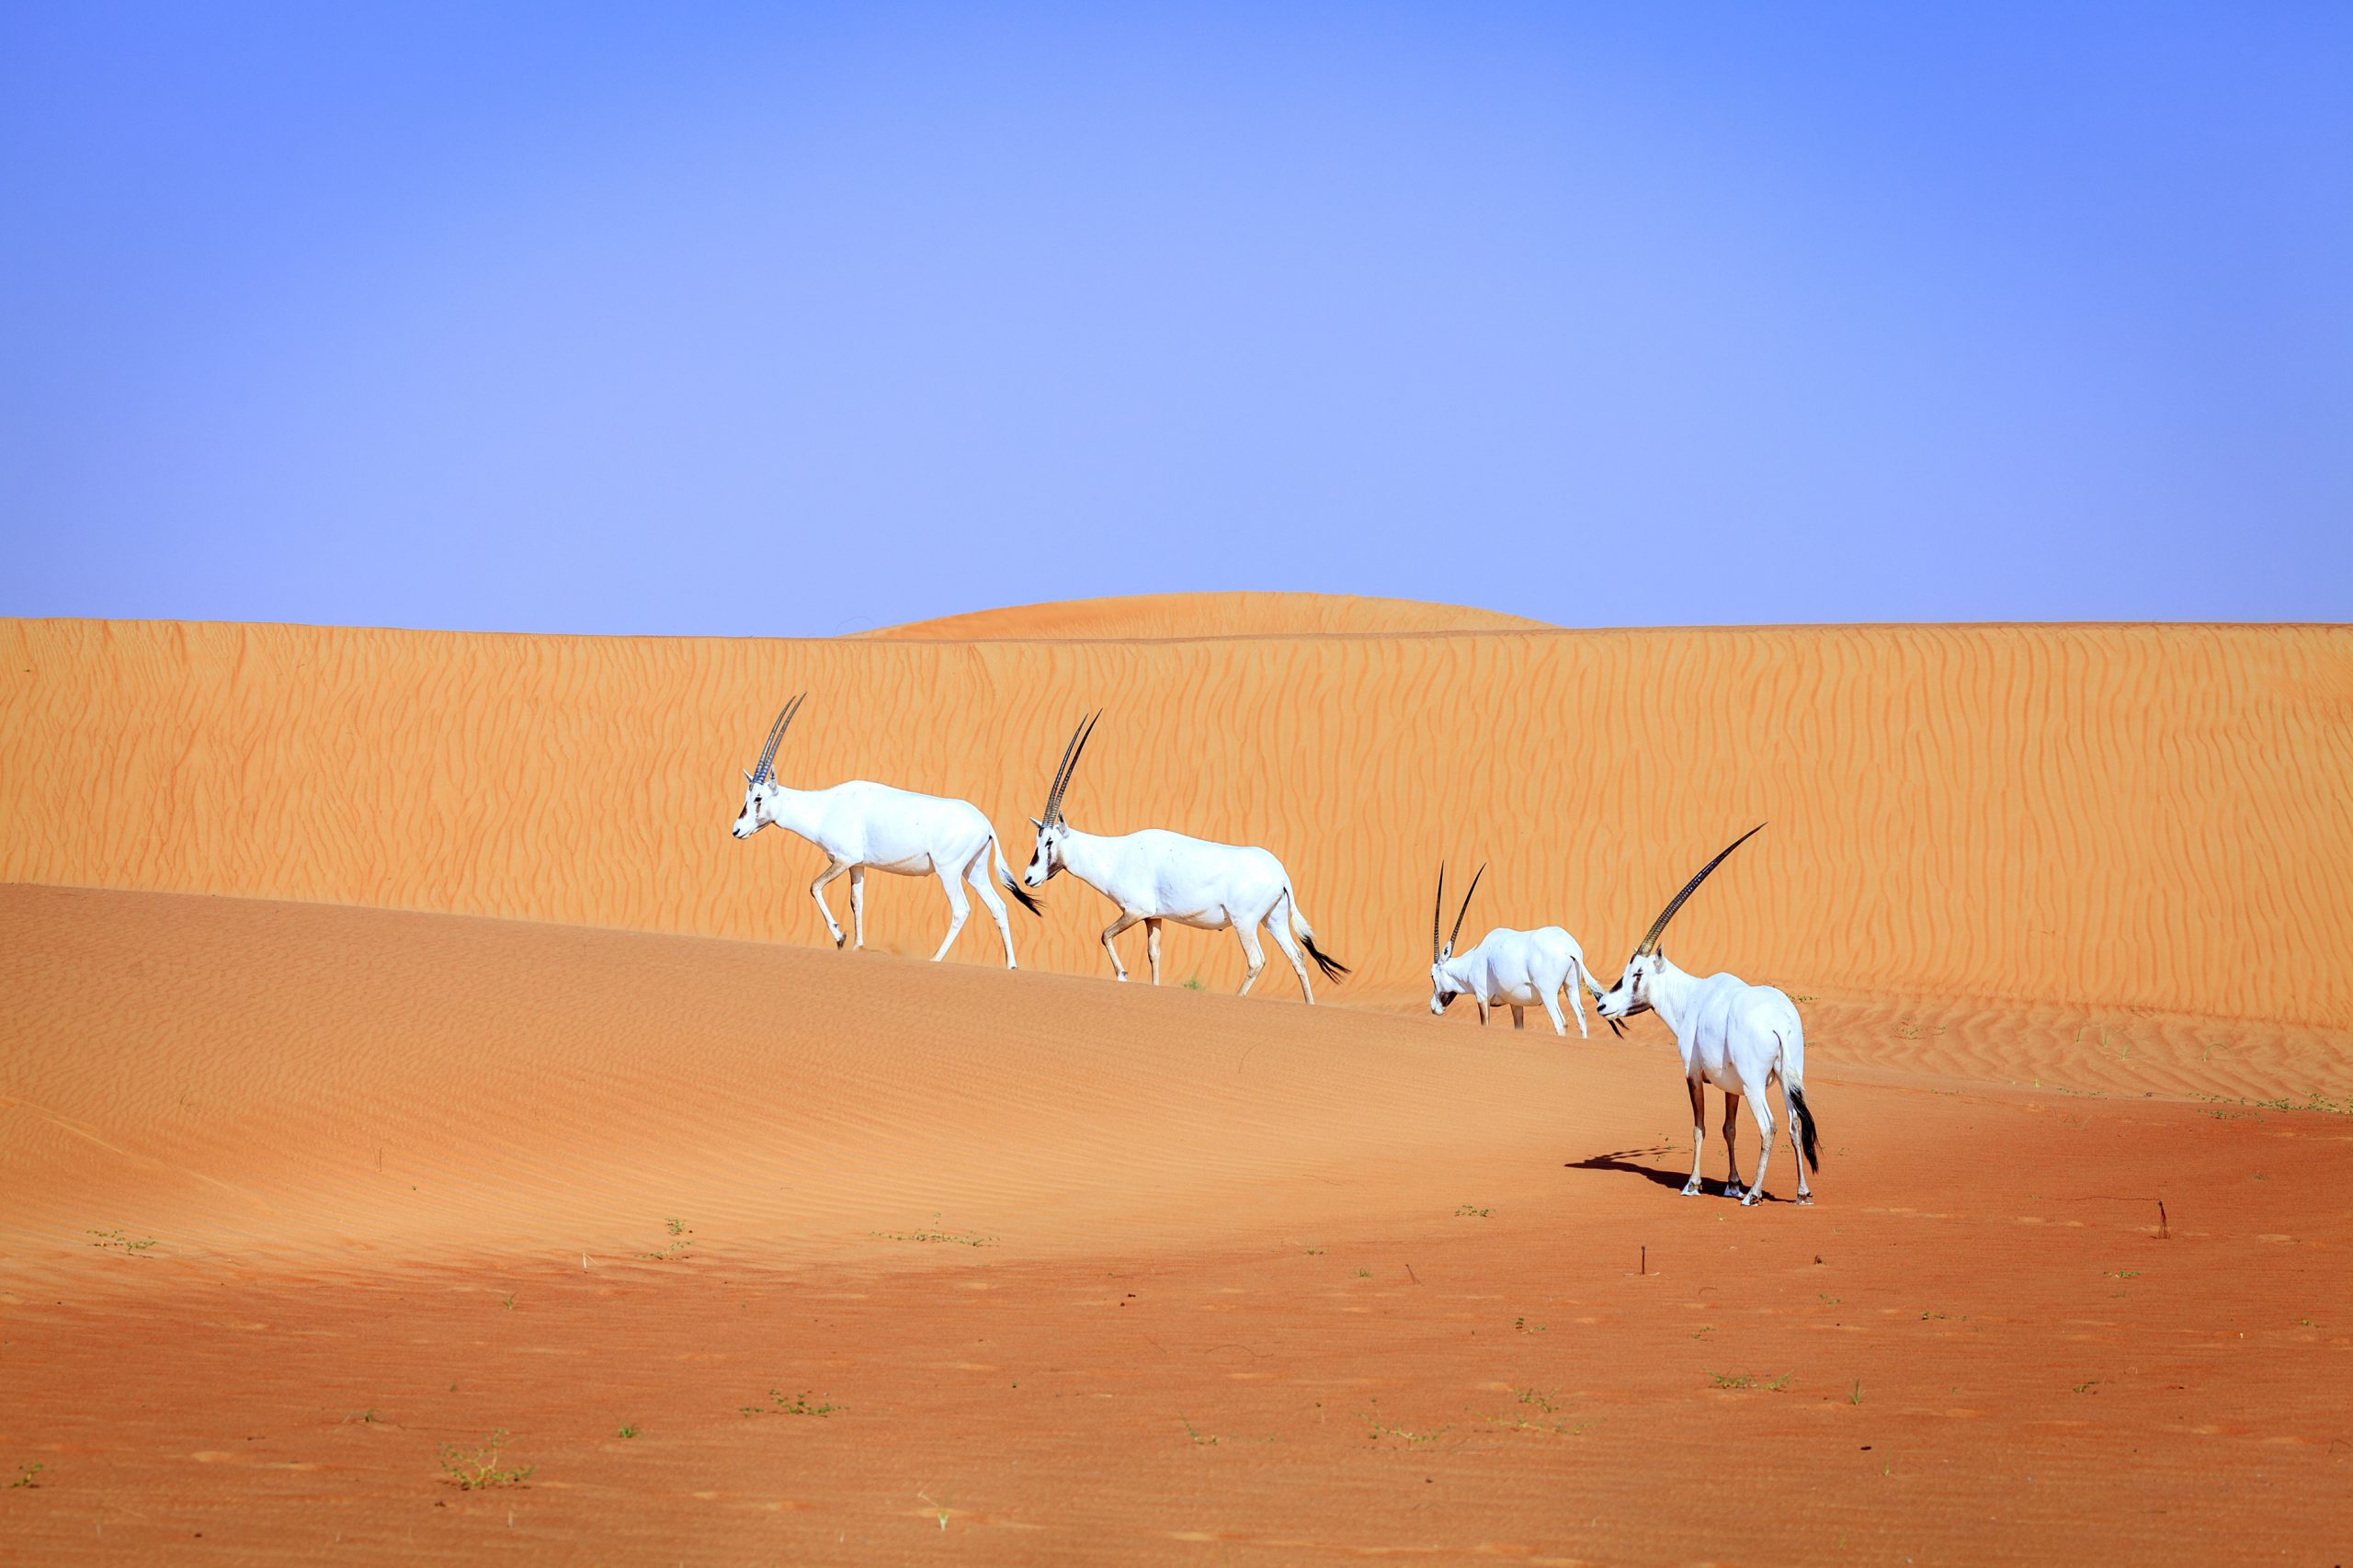 The General Secretariat for the Conservation of the Arabian Oryx (GSCAO) organized a virtual webinar on Education and outreach programmes in the United Arab Emirates: Successes and future priorities.